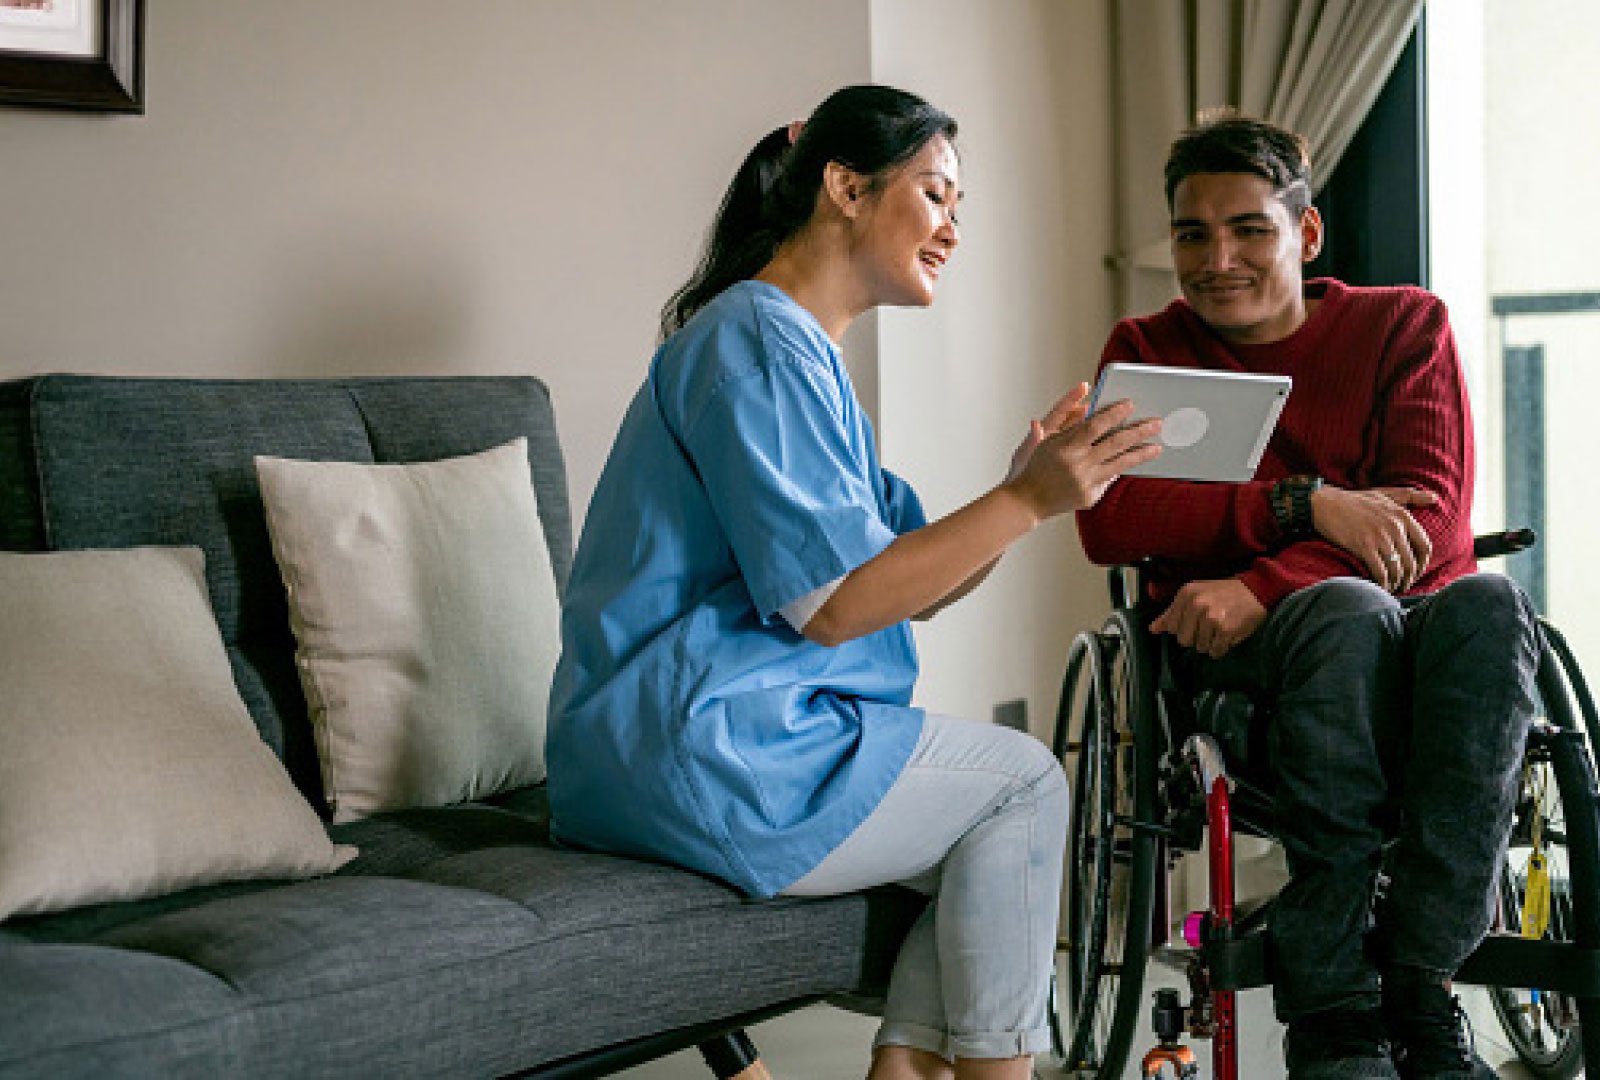 Nurse holding a tablet device in front of a smiling man in a wheelchair.